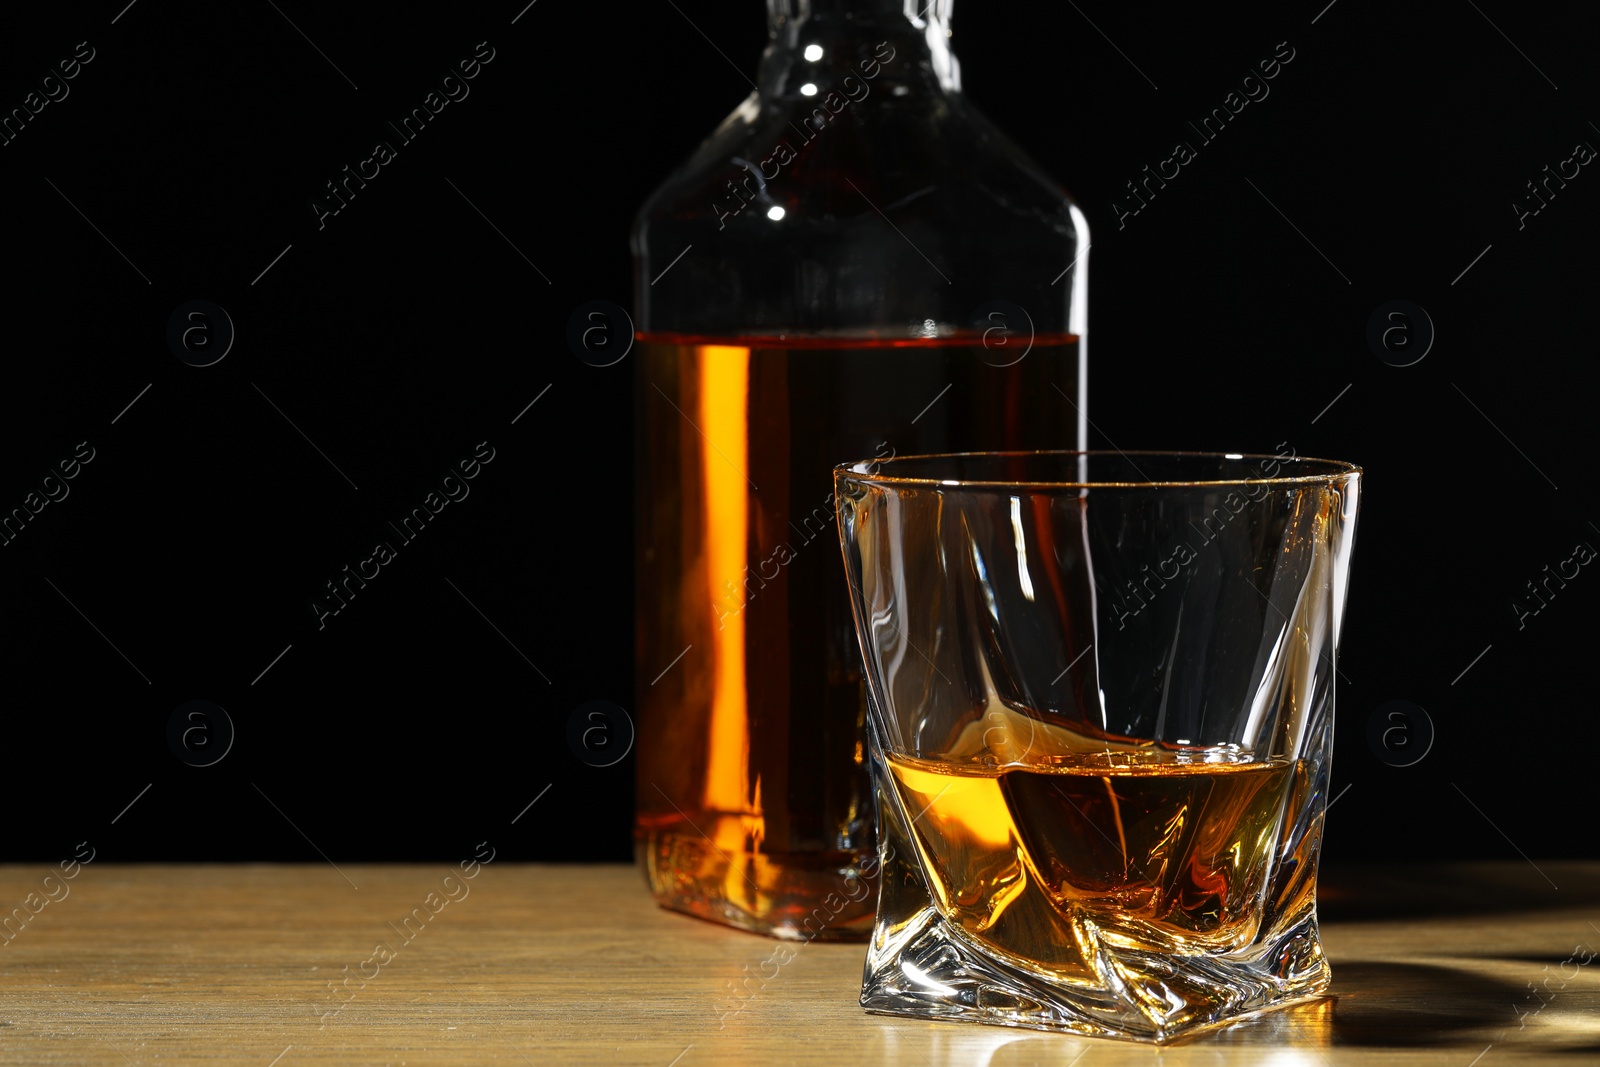 Photo of Whiskey in glass and bottle on wooden table against black background. Space for text